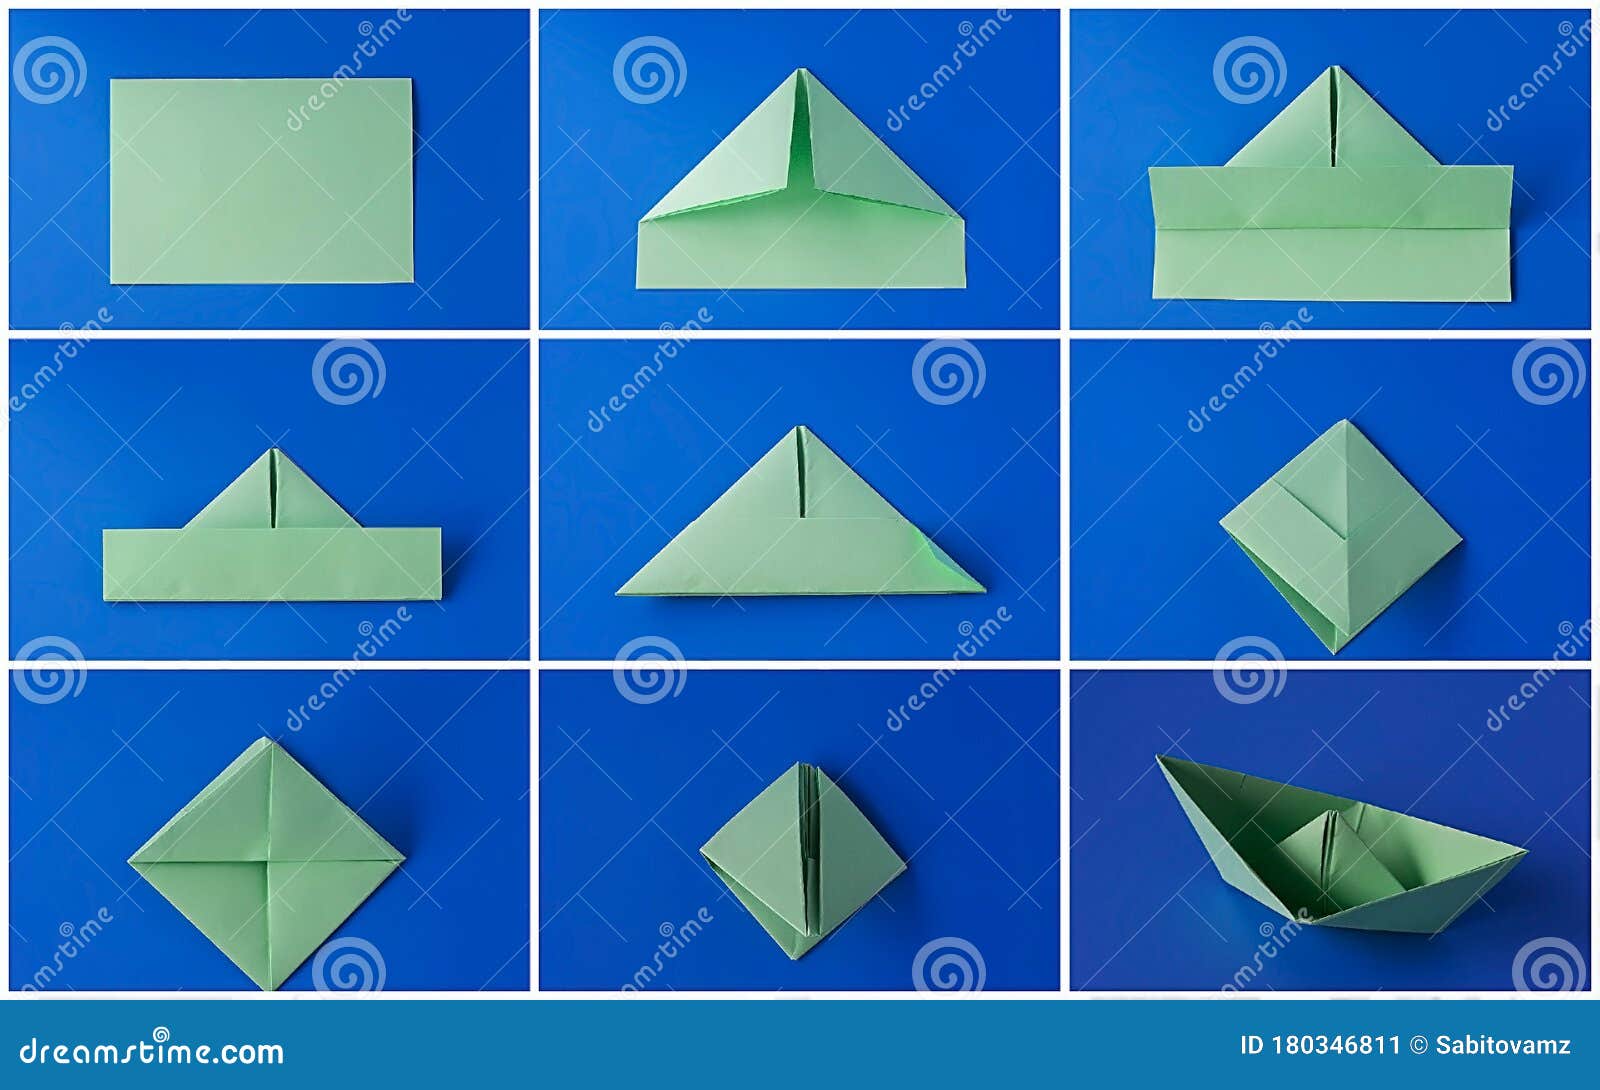 step-by-step instructions for creating a paper boat